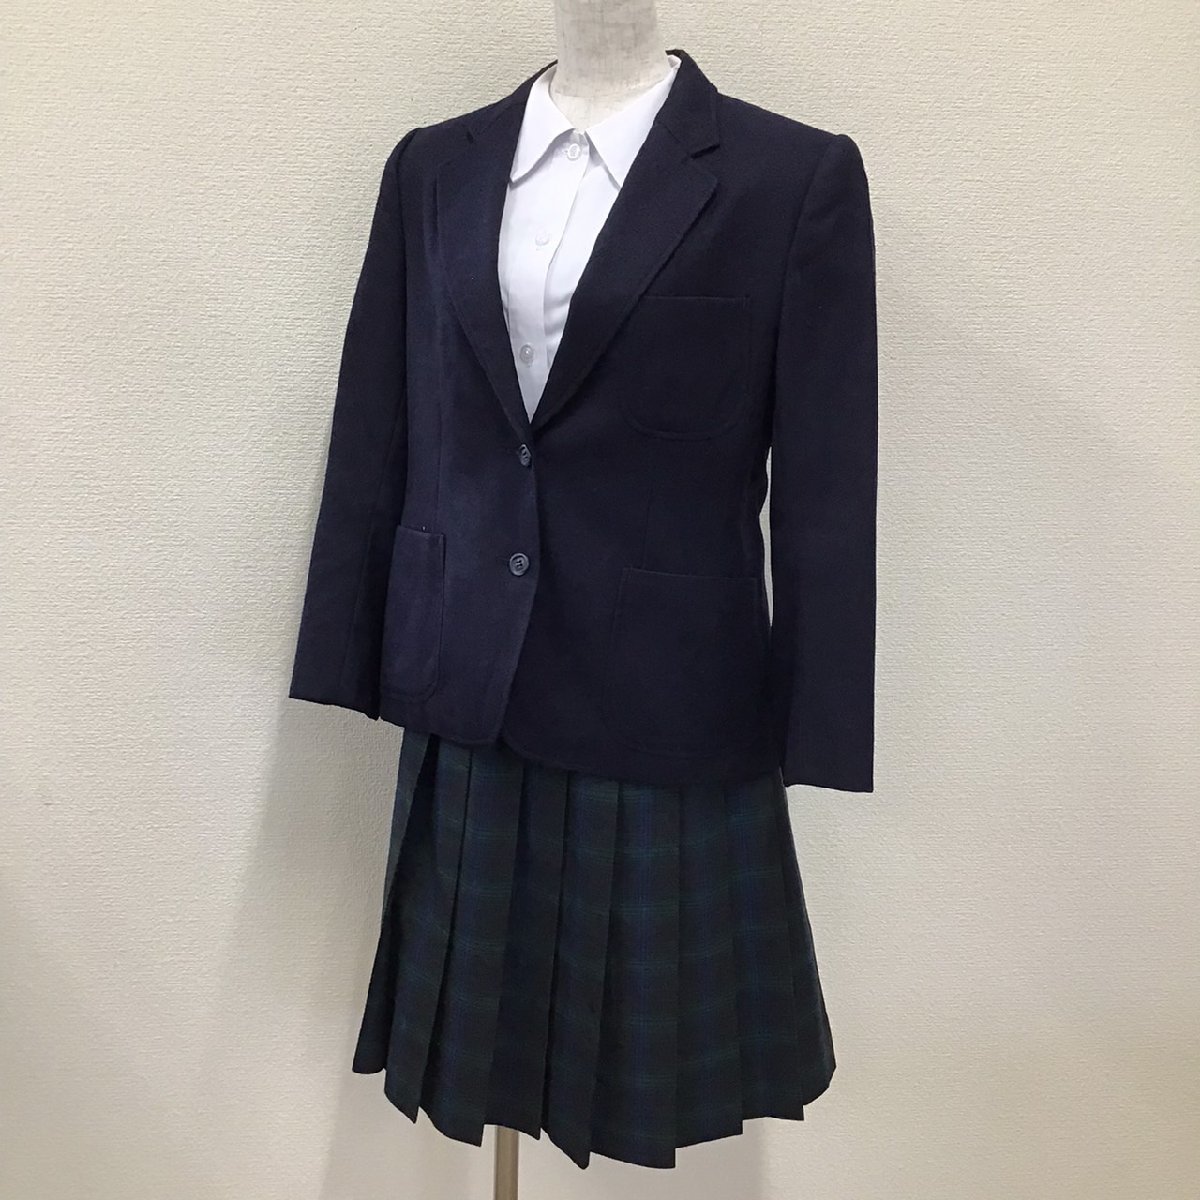 O112/Y( used ) Fukushima direction woman uniform 3 point /. name unknown /M/W66/ height 56/ blaser / blouse / skirt /YAMADA/ check pattern / navy blue / winter clothes / middle ./ high school / school uniform 